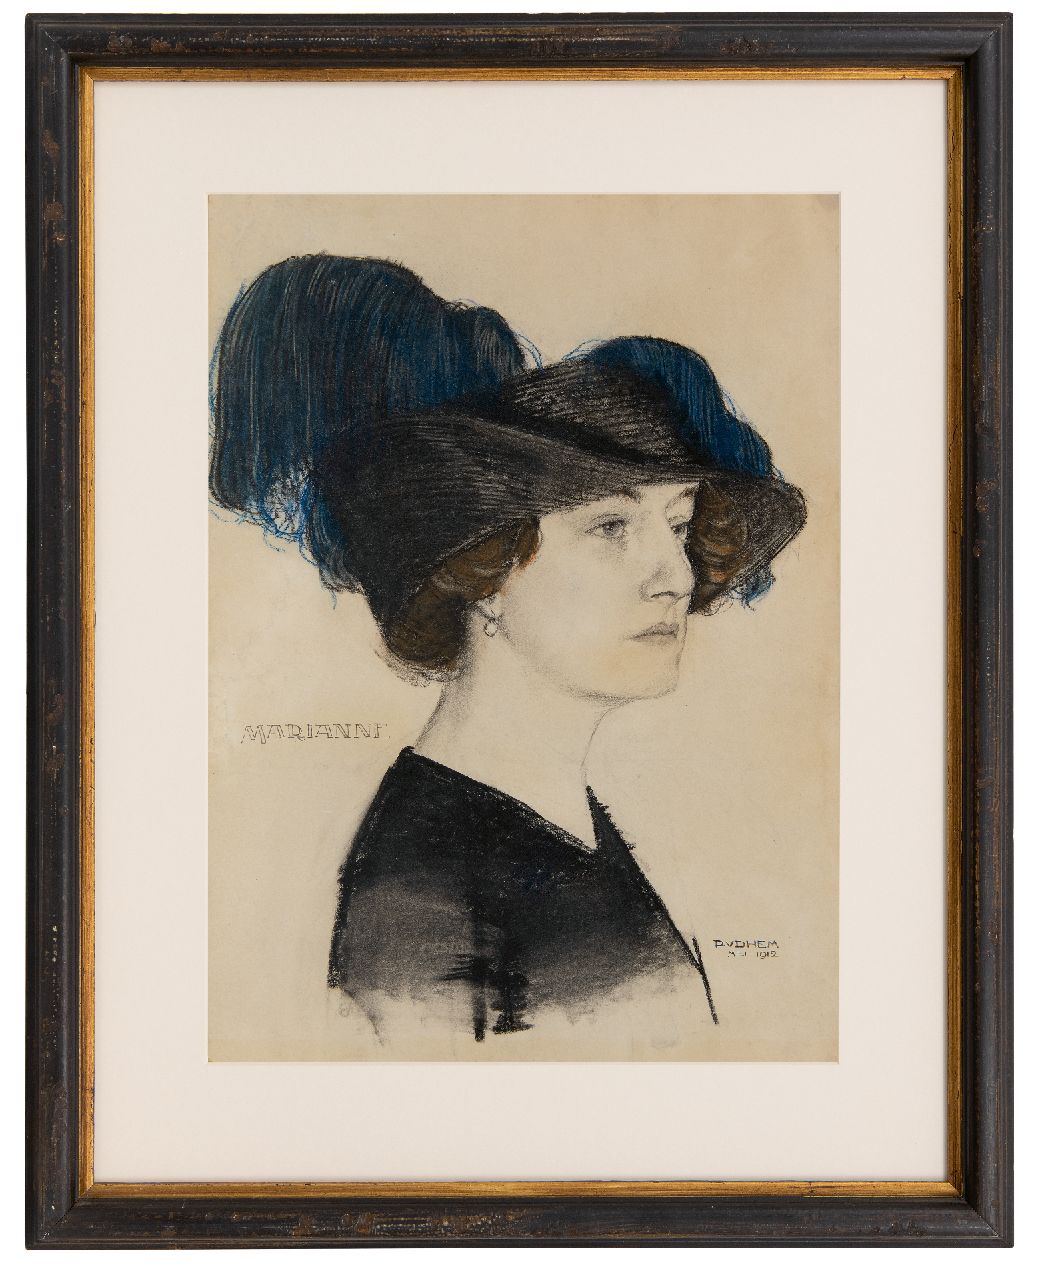 Hem P. van der | Pieter 'Piet' van der Hem | Watercolours and drawings offered for sale | Marianne with fashionable hat, chalk on paper 54.0 x 39.3 cm, signed l.r. and dated 'Mei' 1912